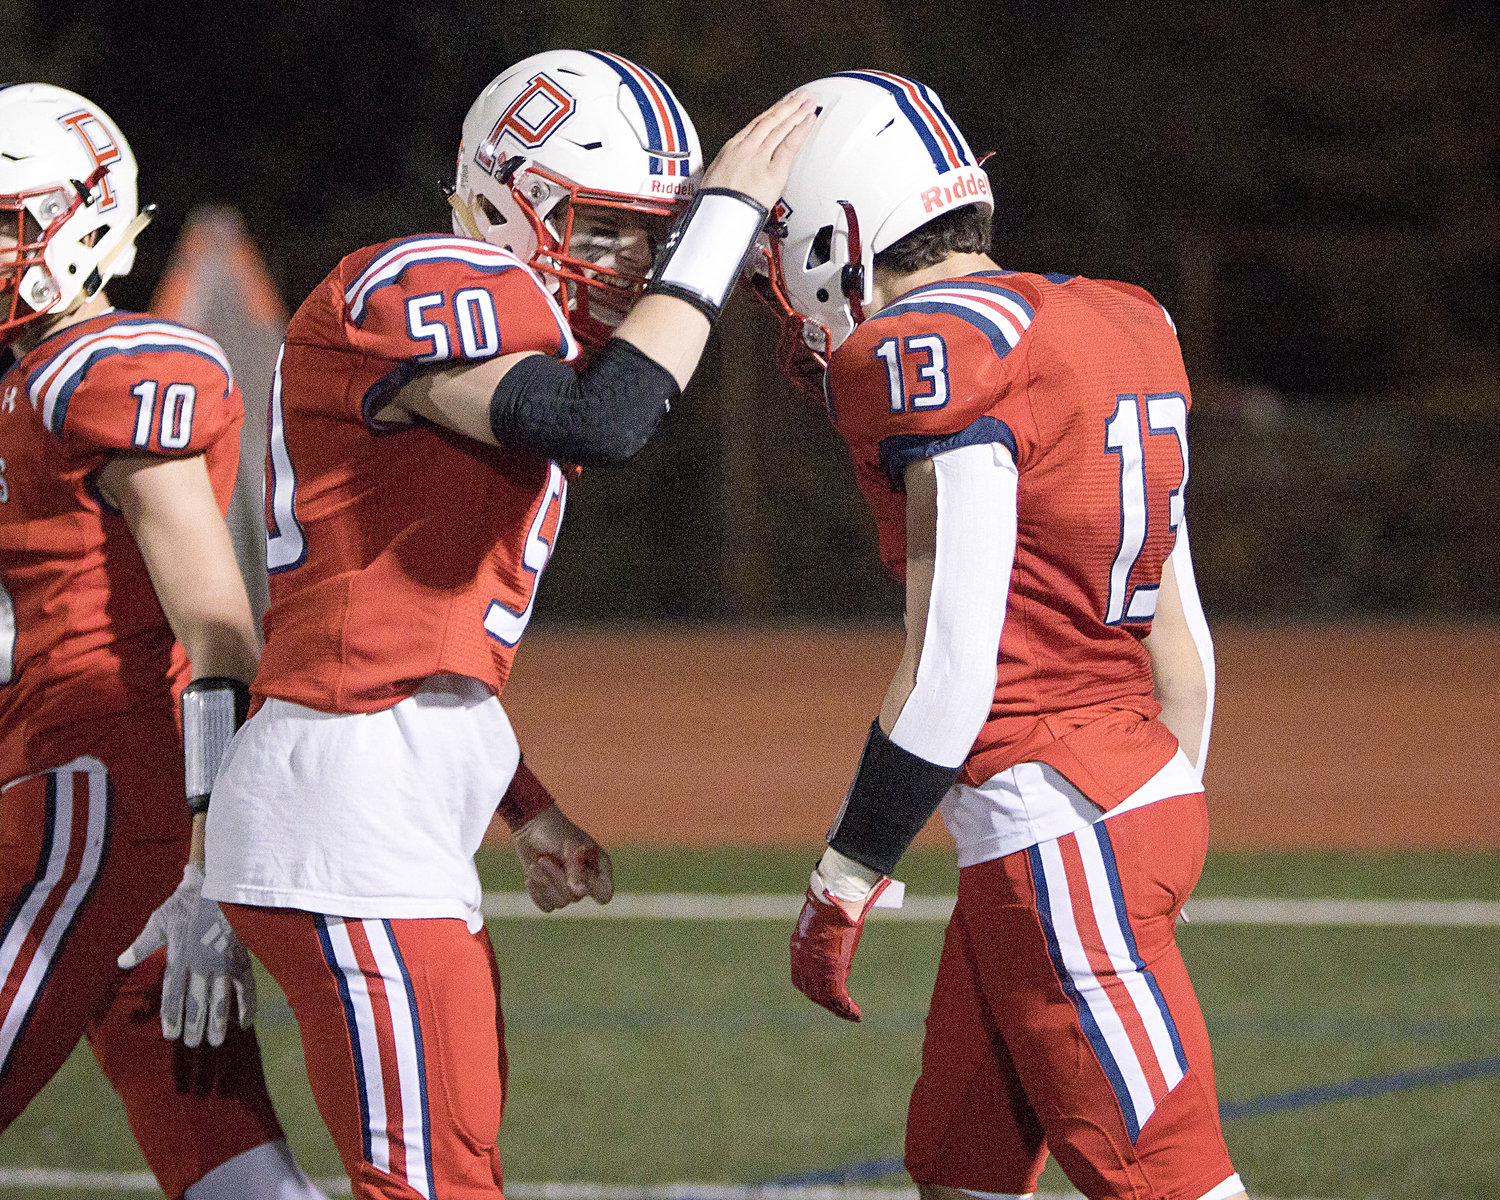 Evan Beese (right) is congratulated by Henry Rodrigues after picking off a pass on Shea’s opening possession.